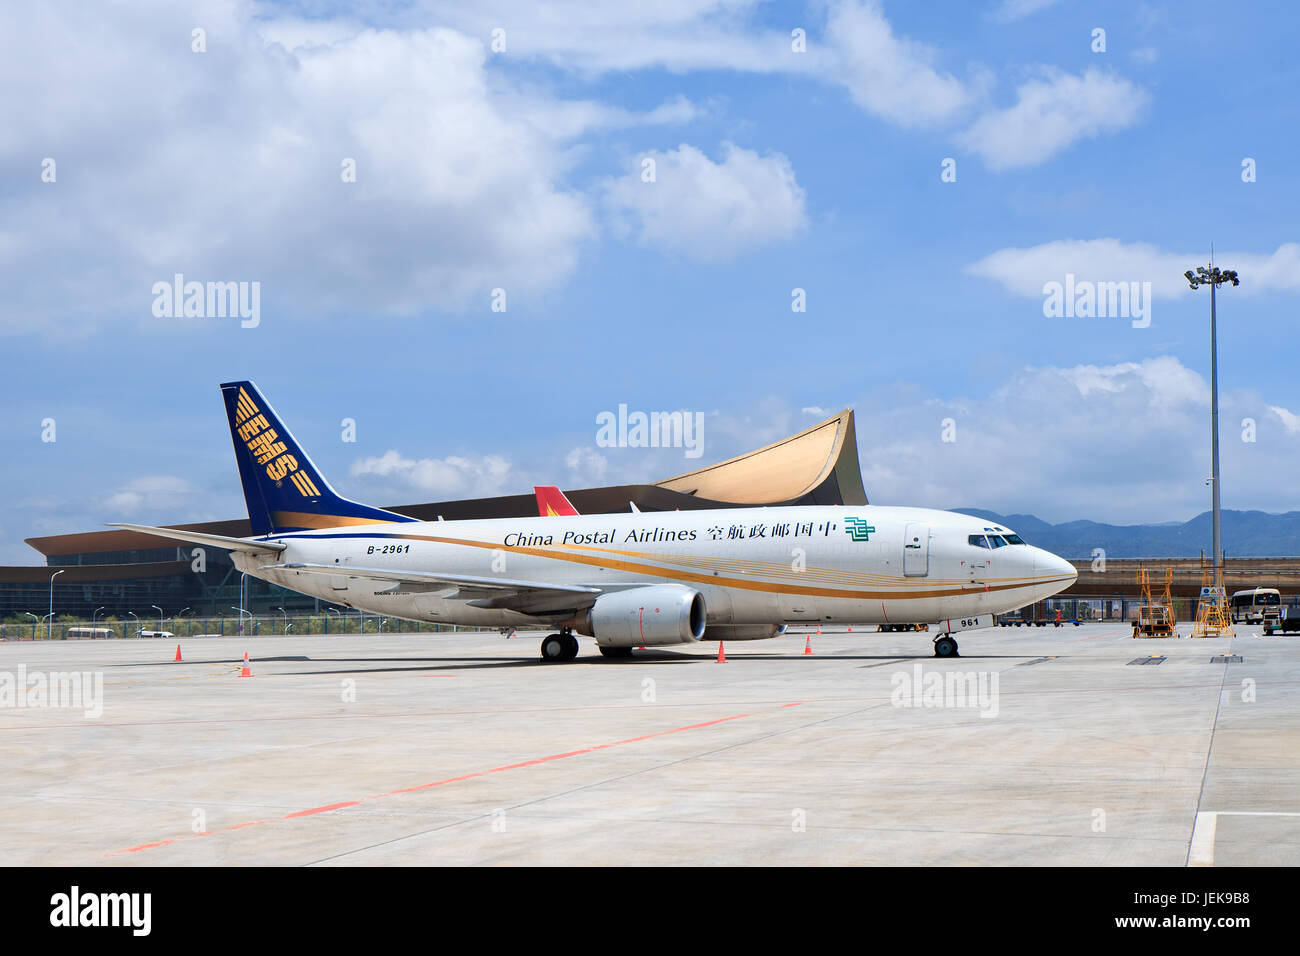 KUNMING-JUNE 30, 2014. Boeing 737-300 from China Postal Airlines parked at Kunming Changshui International Airport. Stock Photo